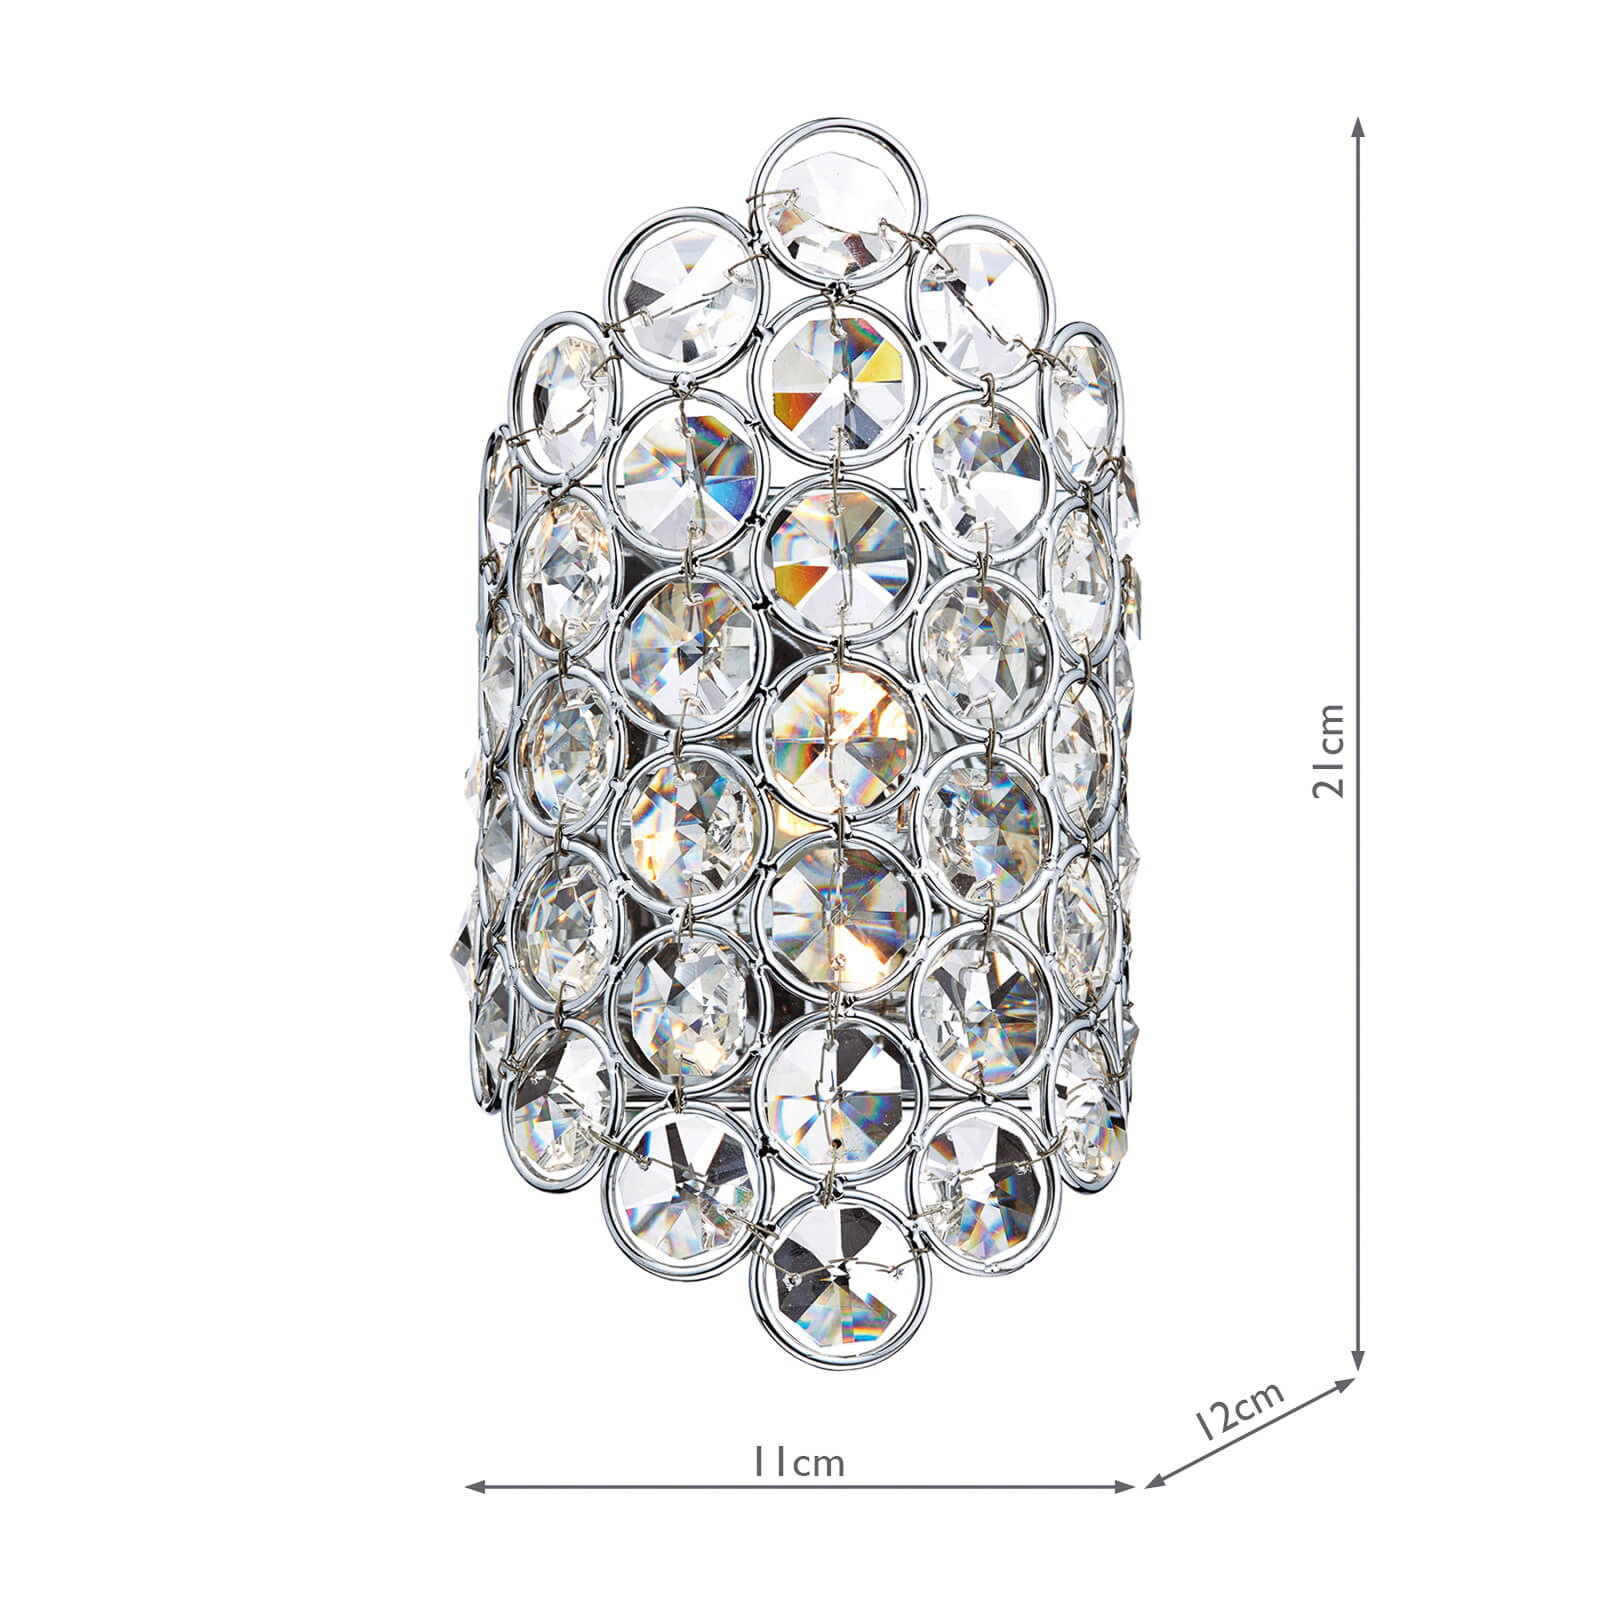 Frost wall light with faceted crystals